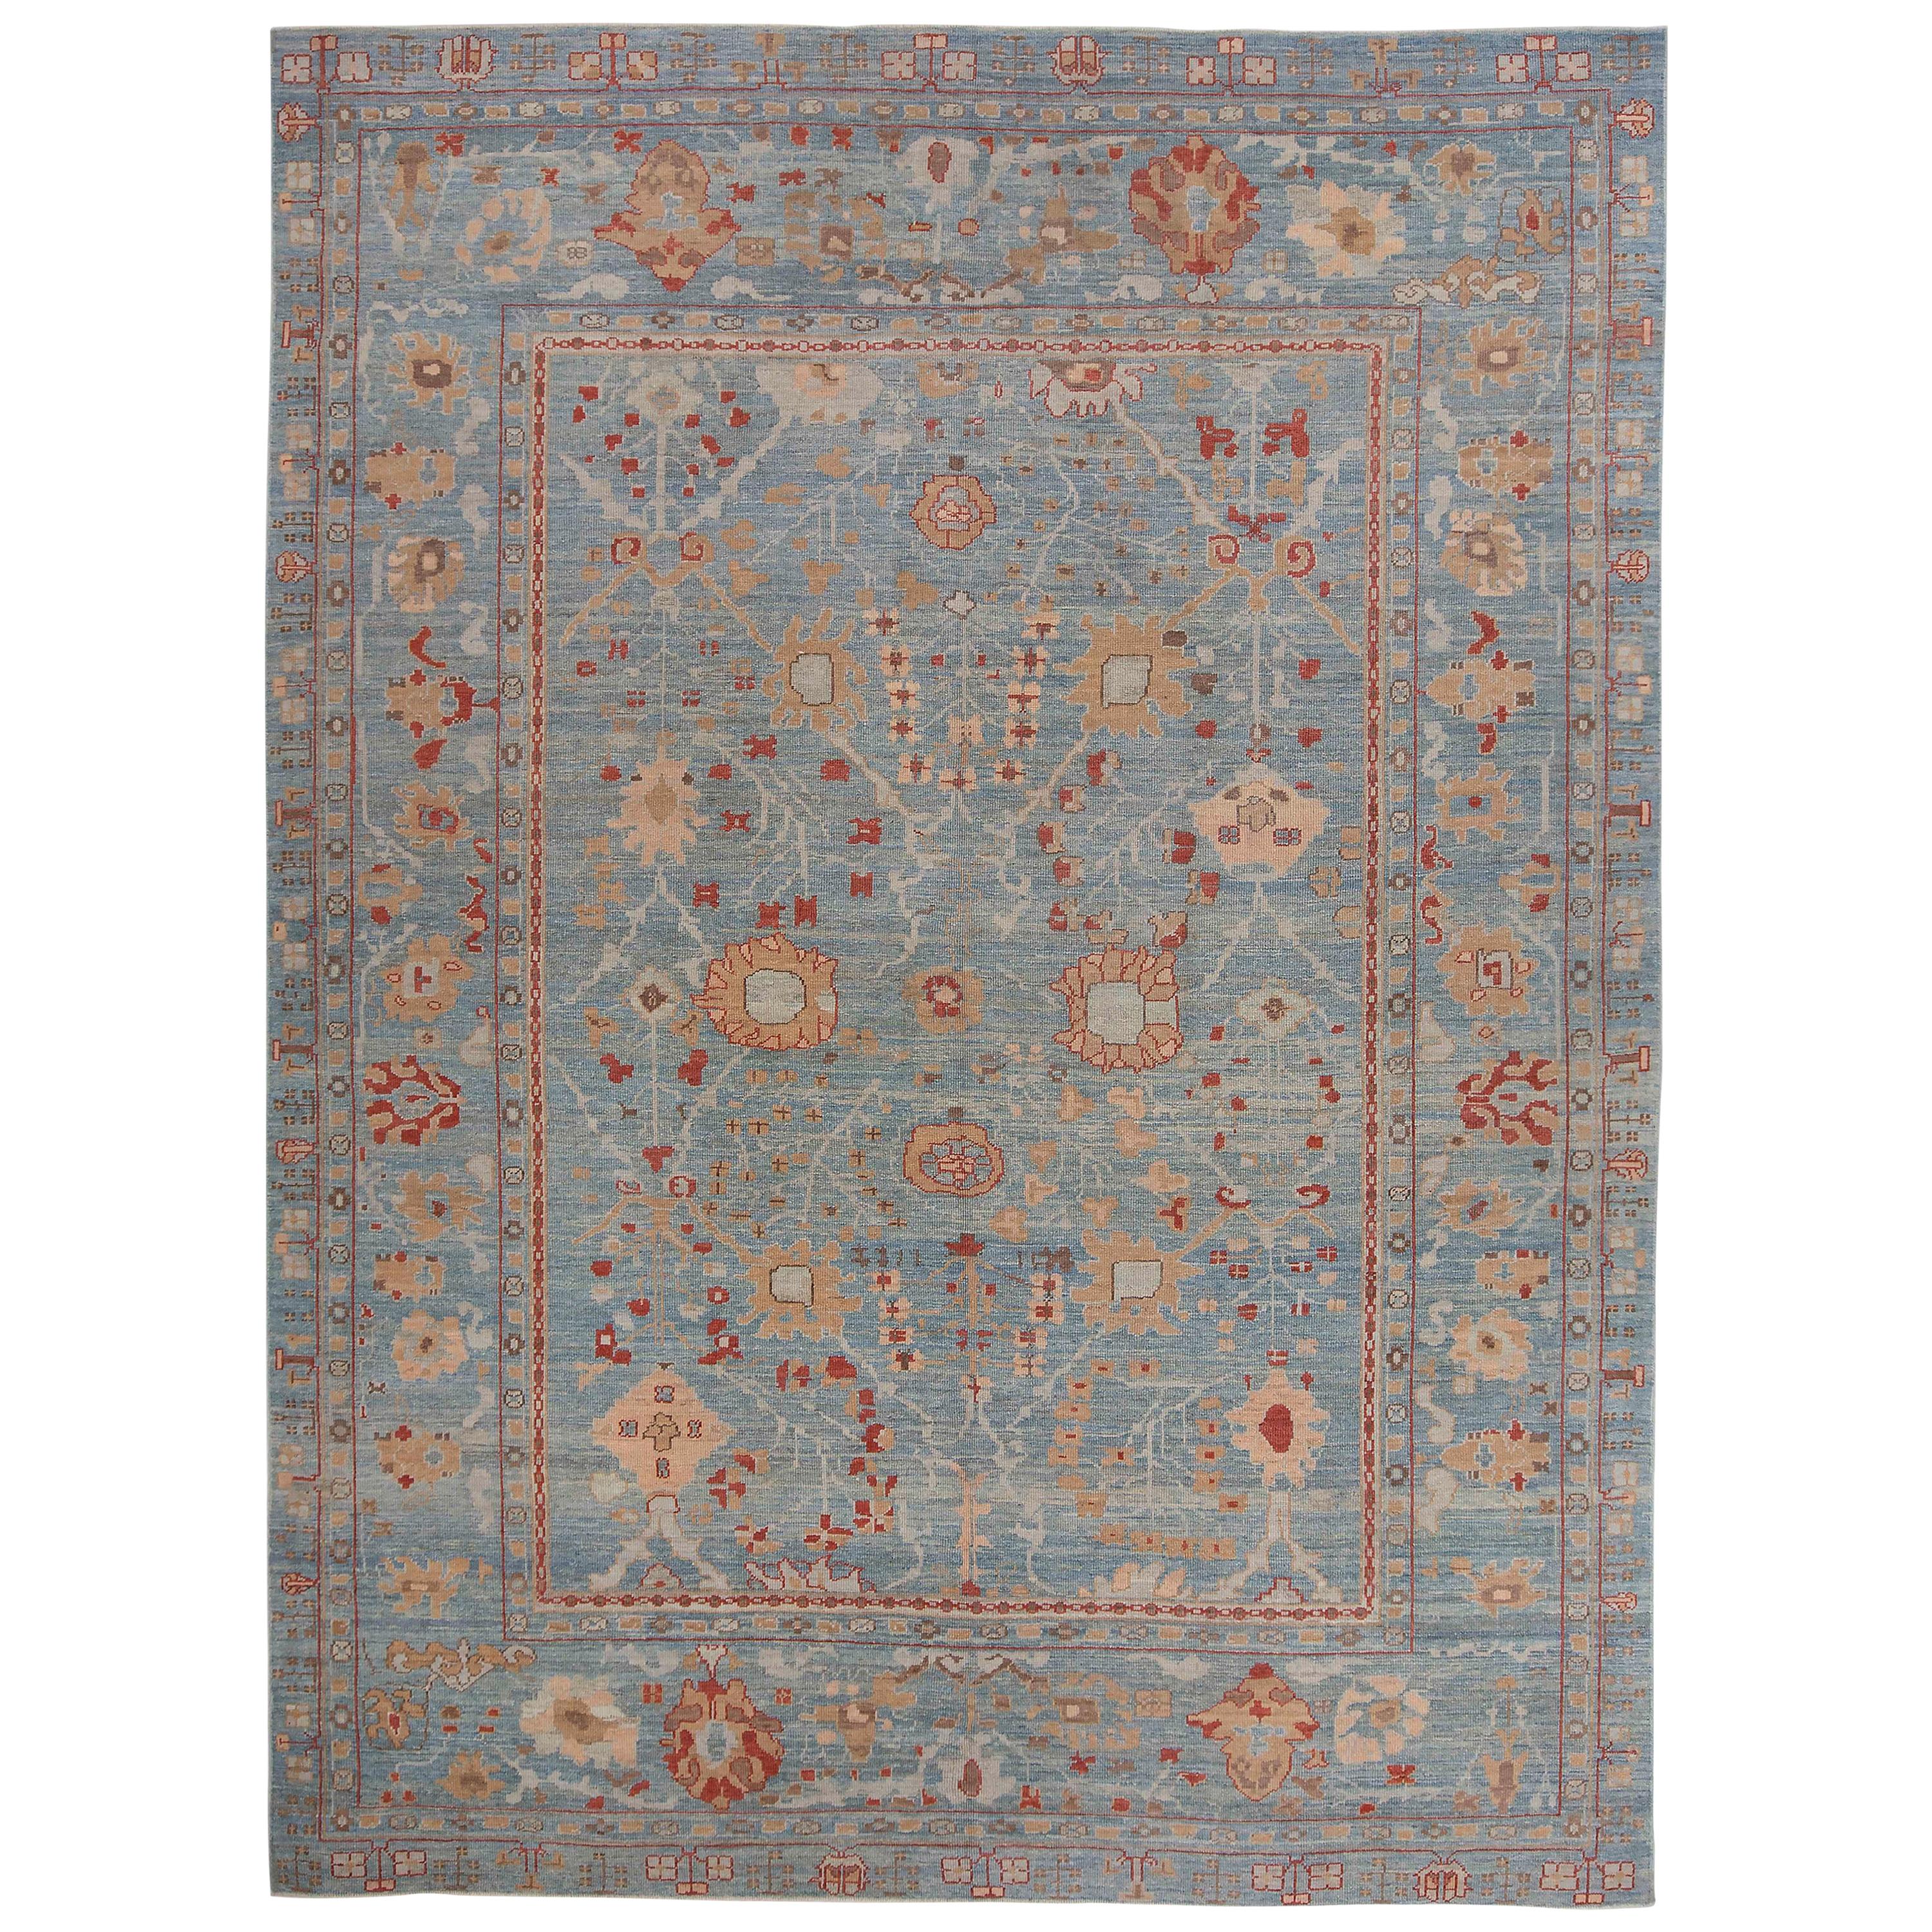 New Turkish Oushak Rug with Red & Brown Floral Details on Blue Gray Field For Sale